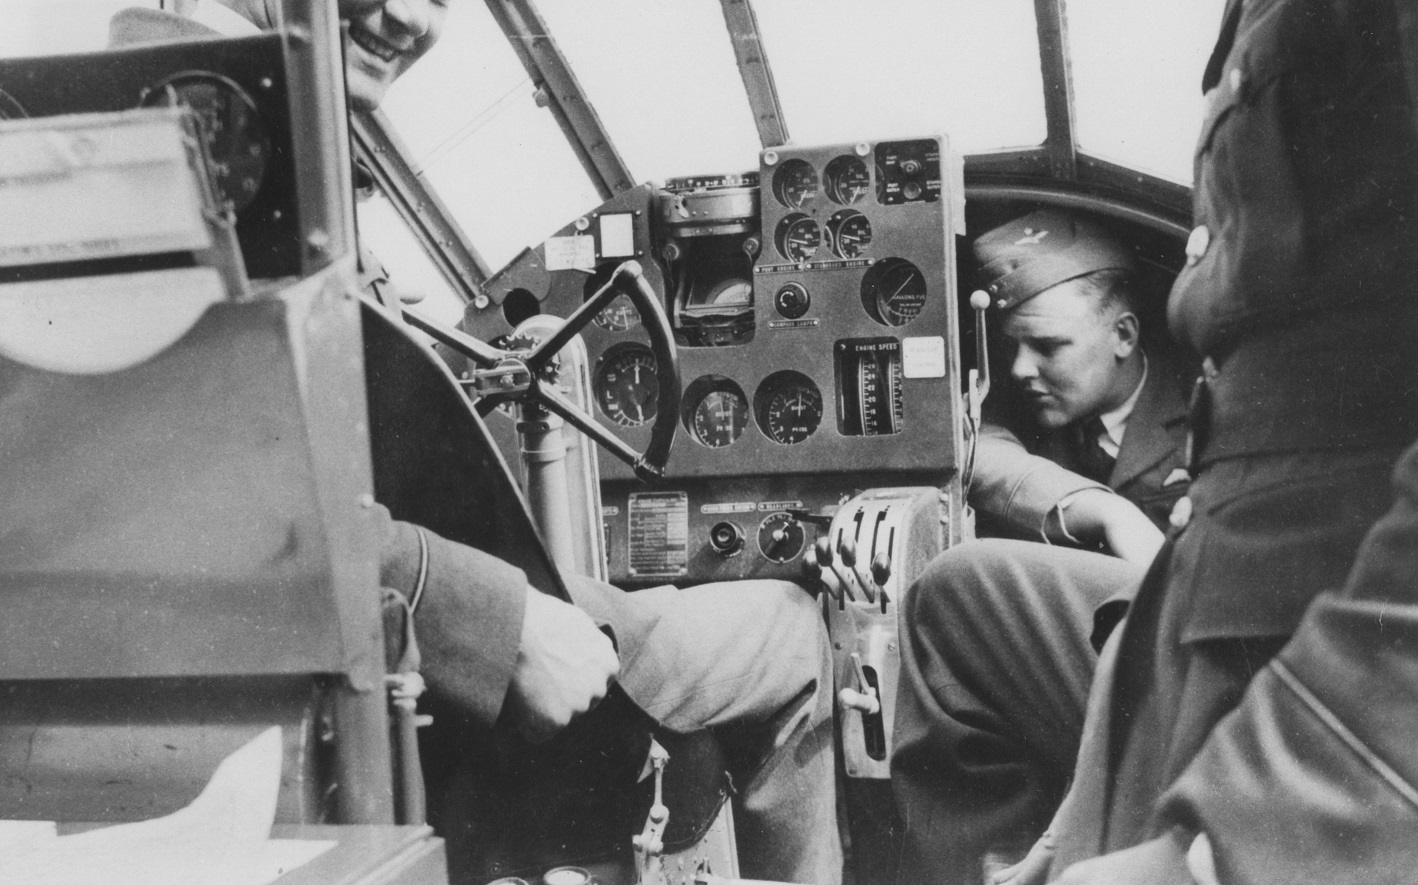 Black and white image shows World War Two RAF personnel inside the cockpit of an Anson aircraft.